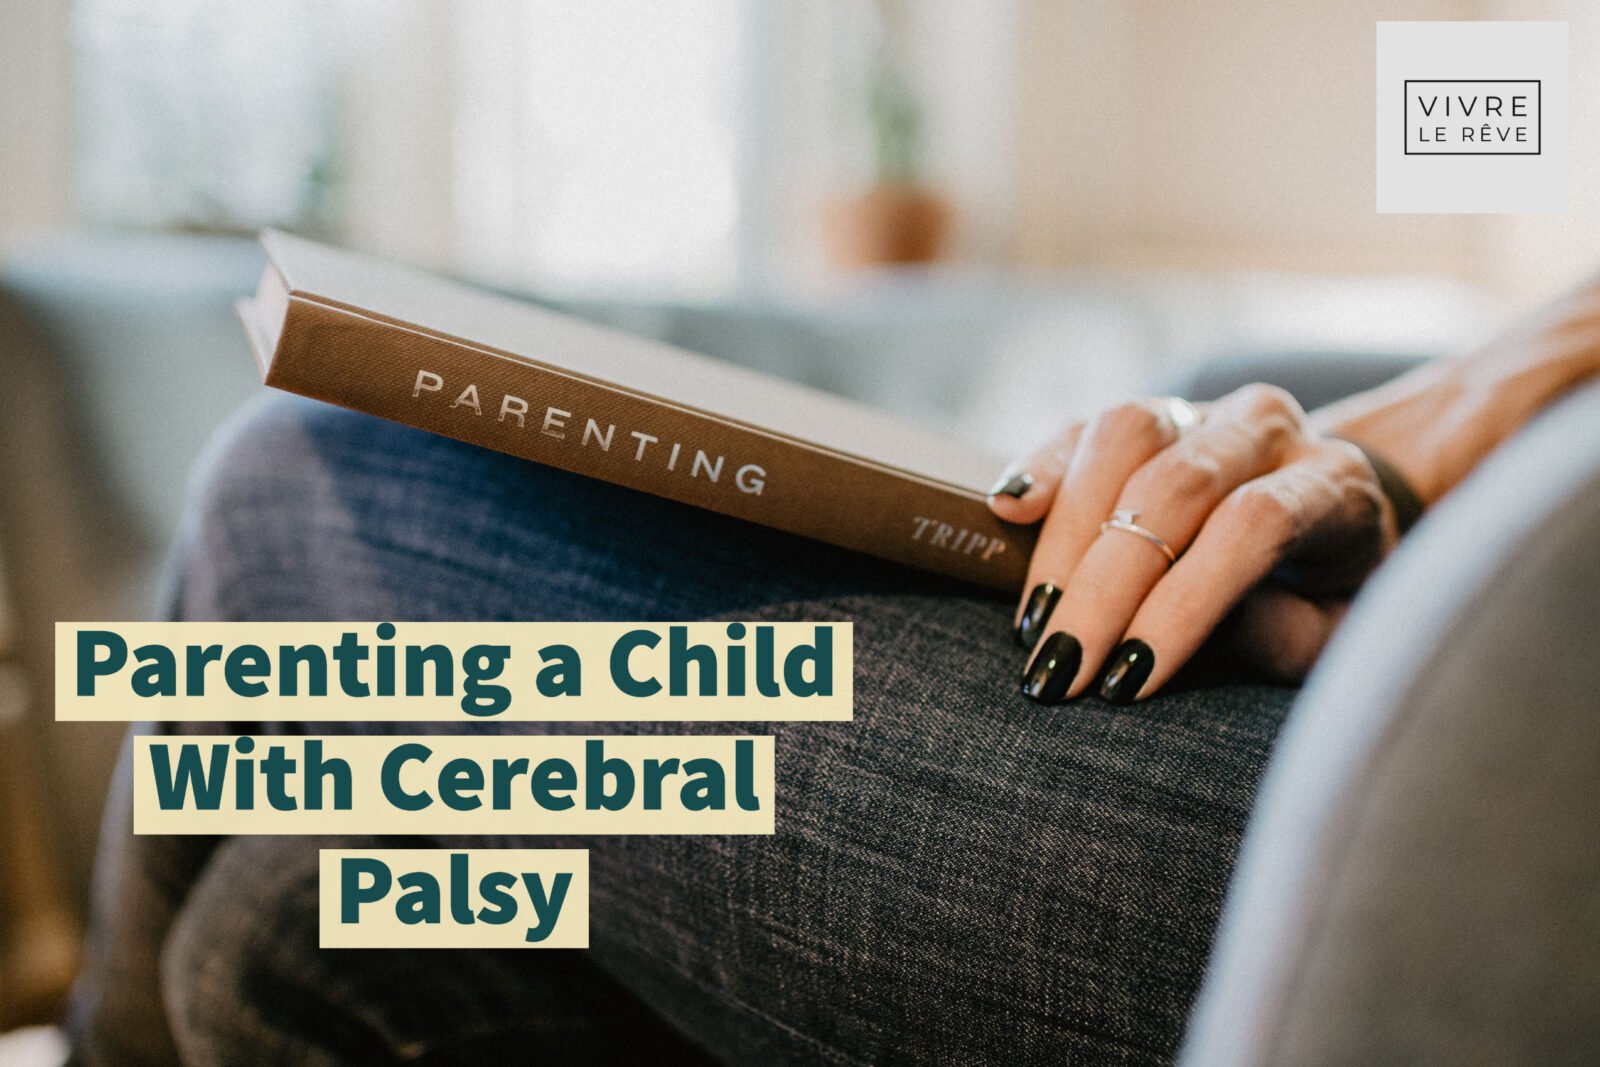 Parenting a Child With Cerebral Palsy